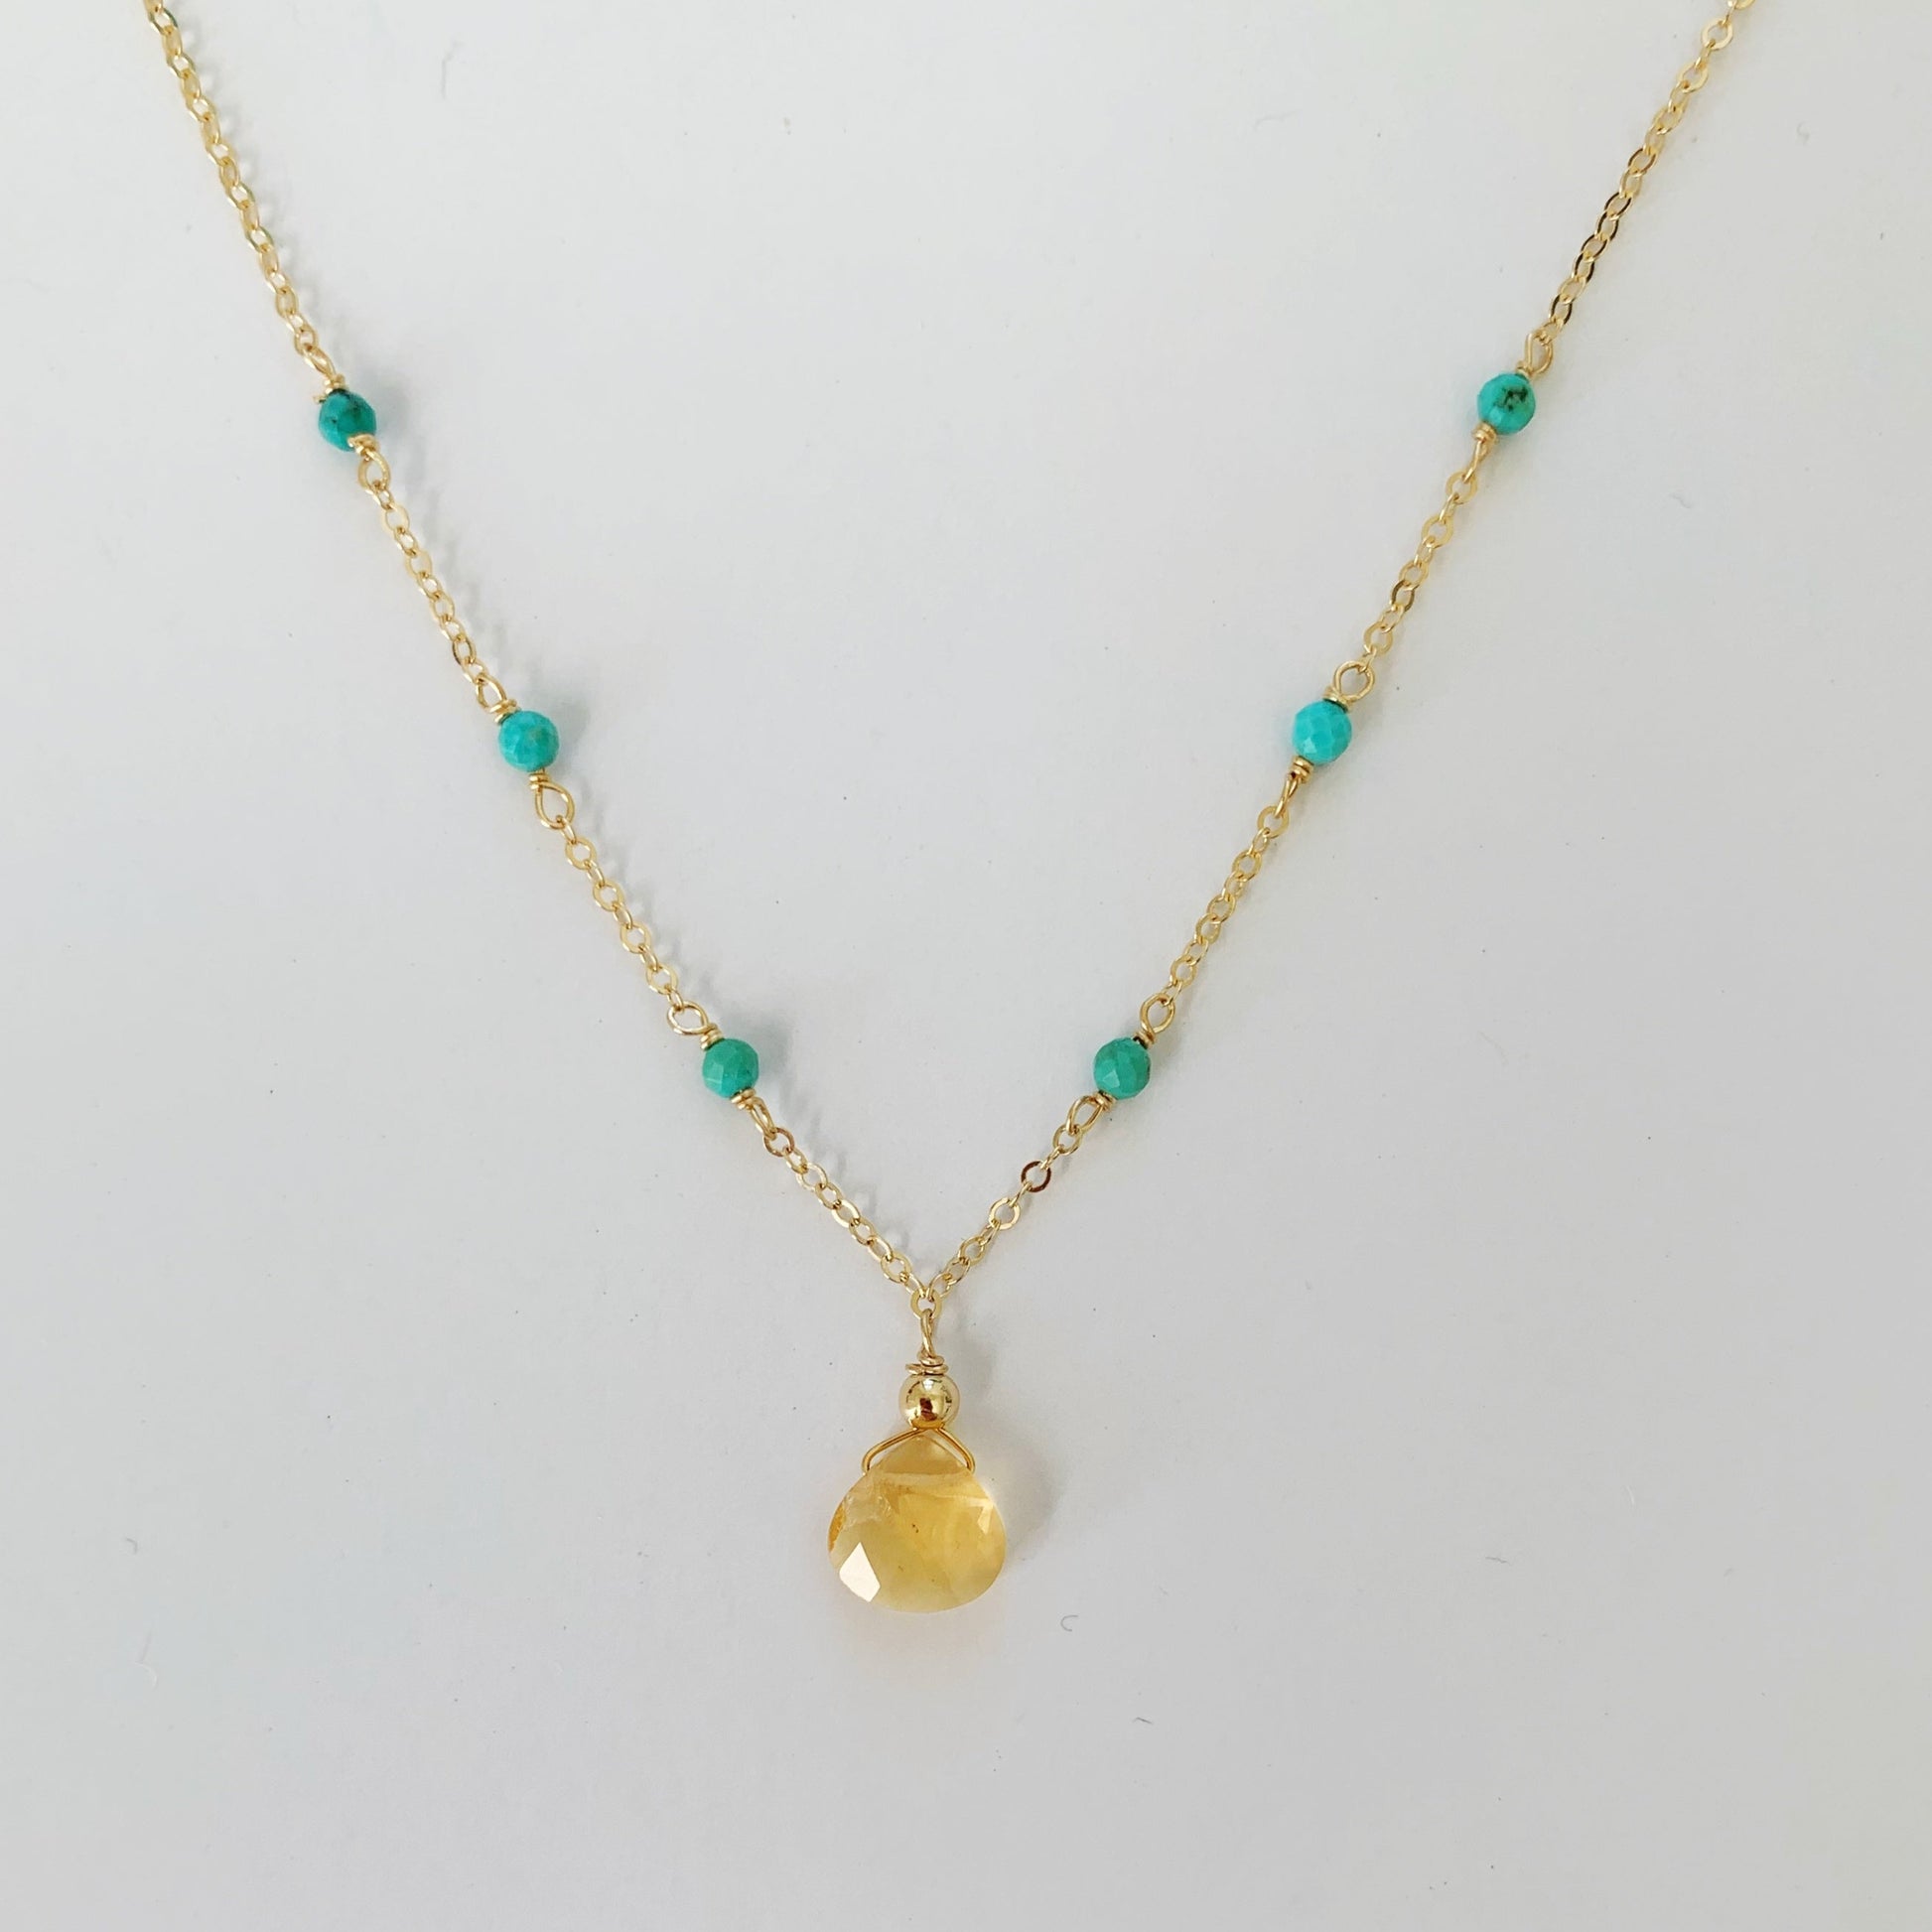 Ray of Sunshine Necklace by mermaids and madeleines is a dainty necklace featuring a yellow citrine drop and natural turquoise on 14k gold filled chain. this necklace is photographed on a white surface